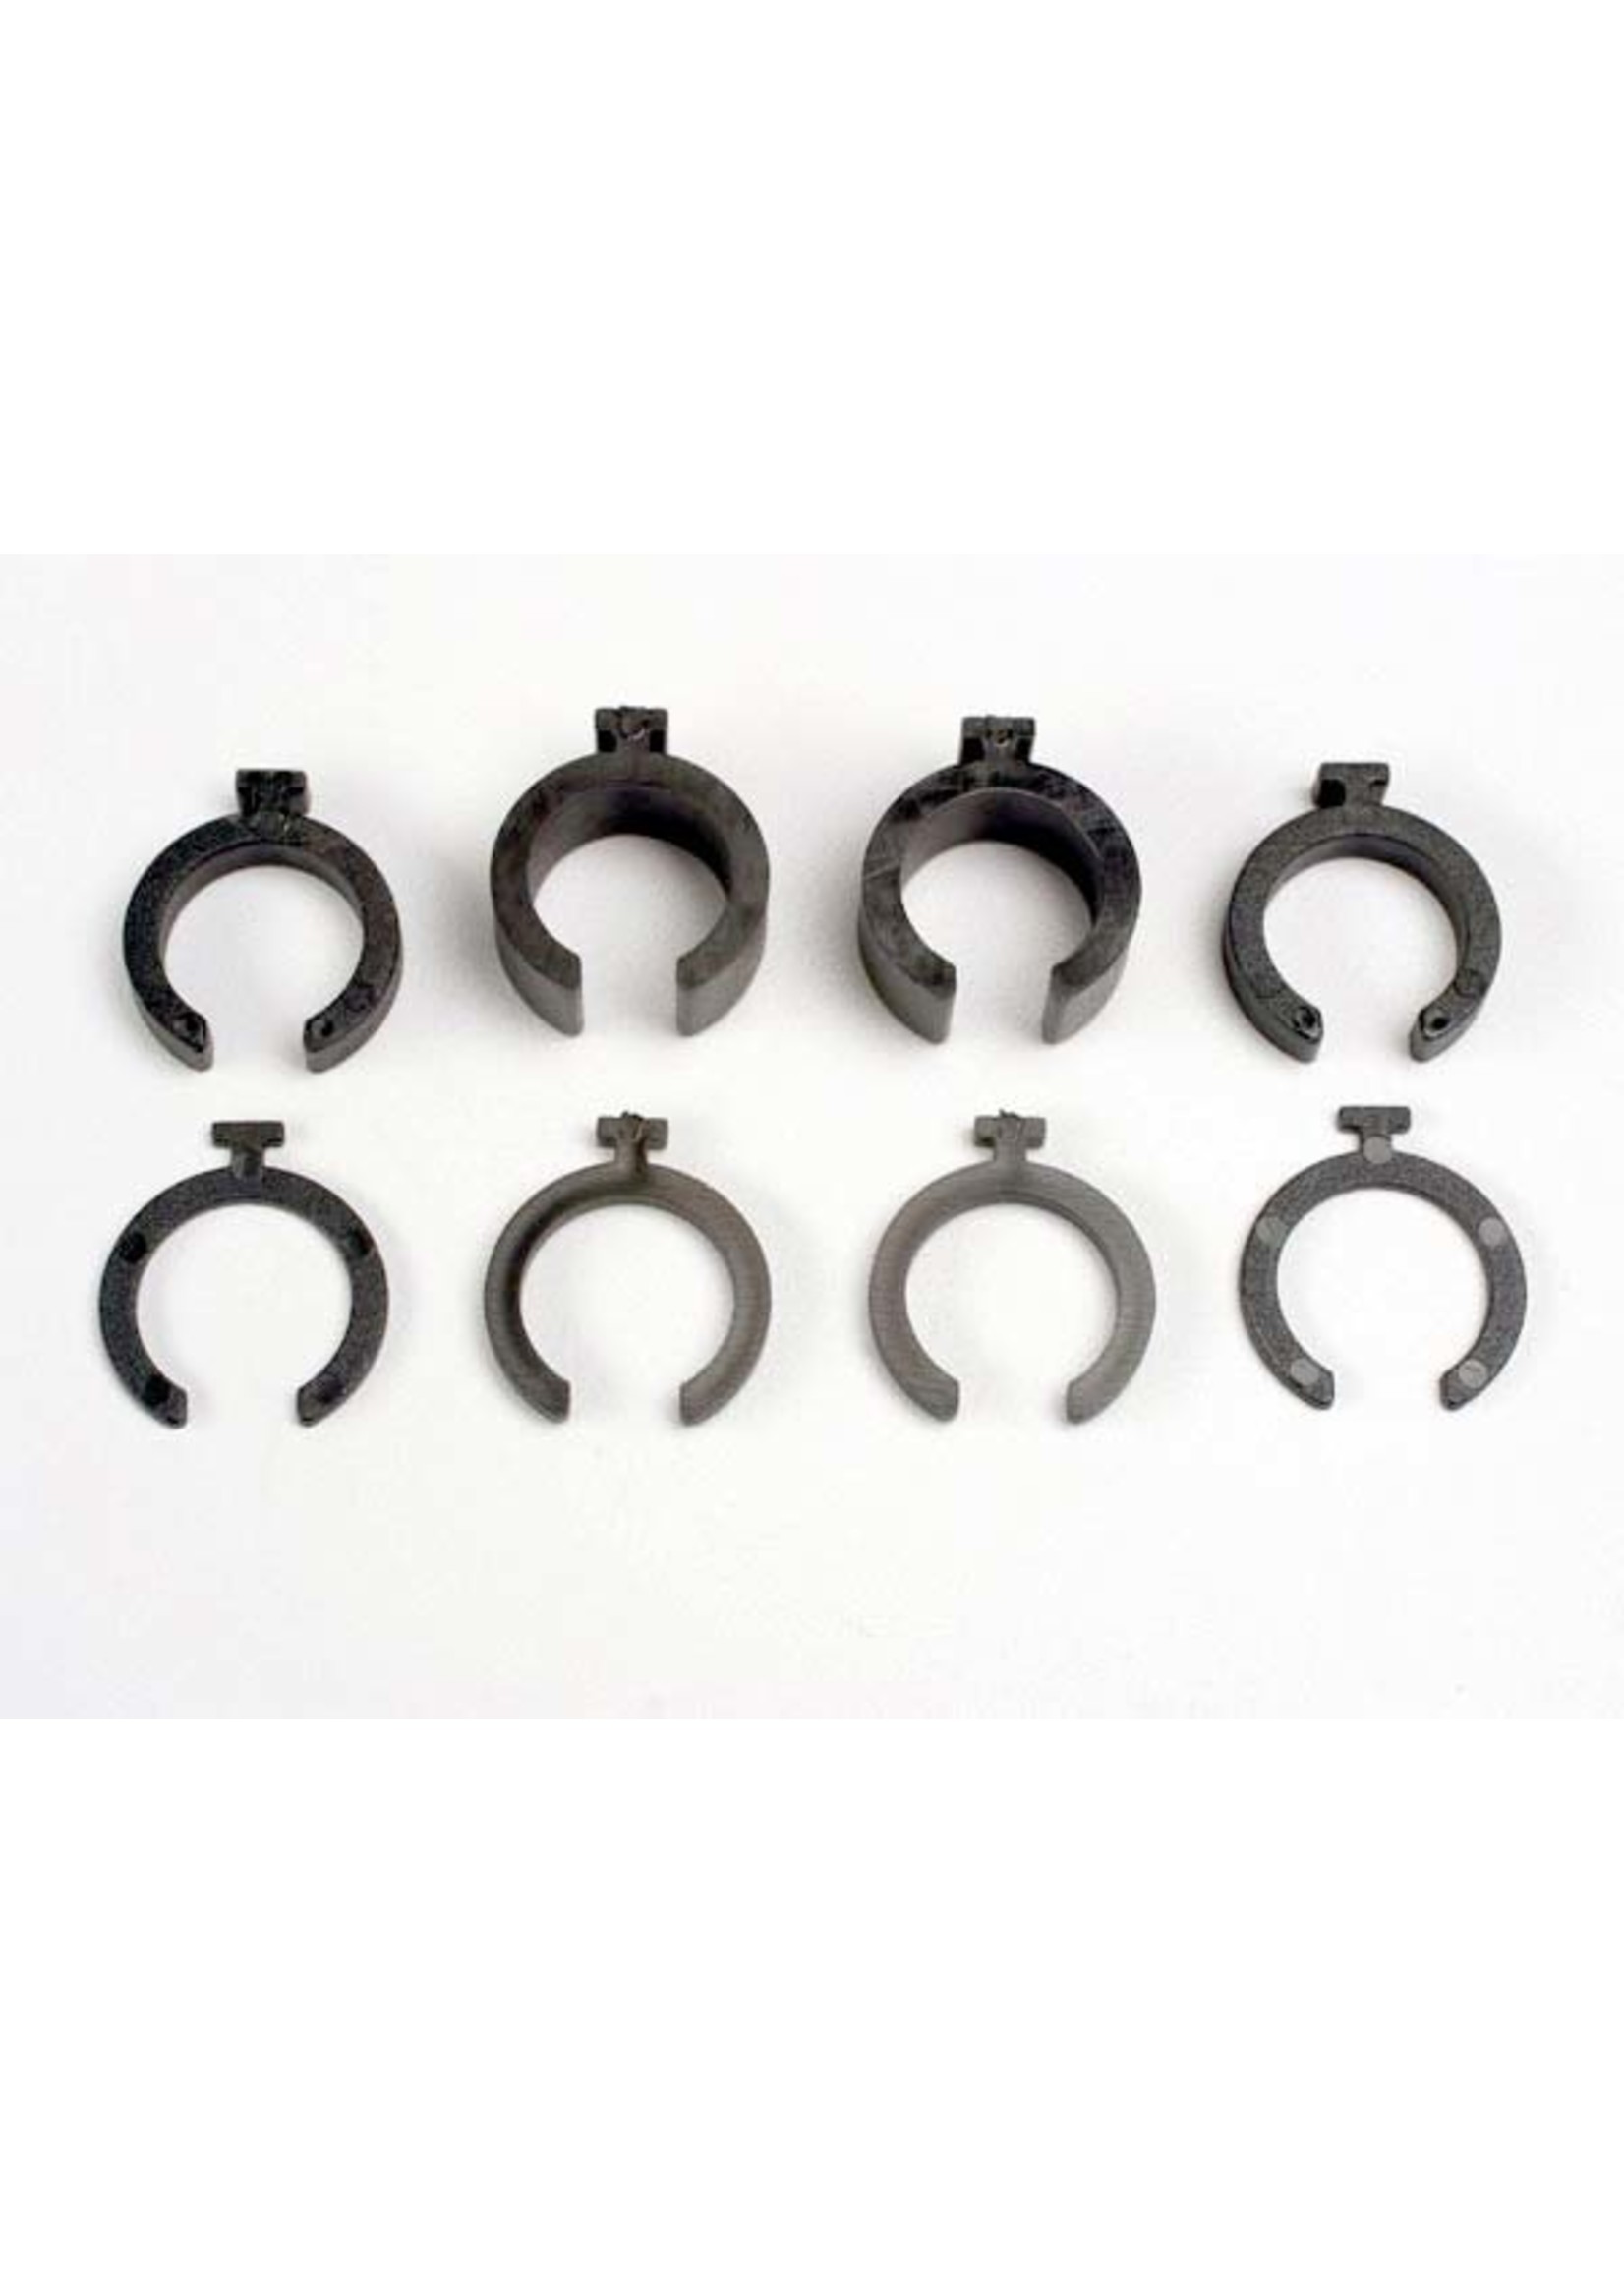 Traxxas 3769 - Spring Pre-Load Spacers